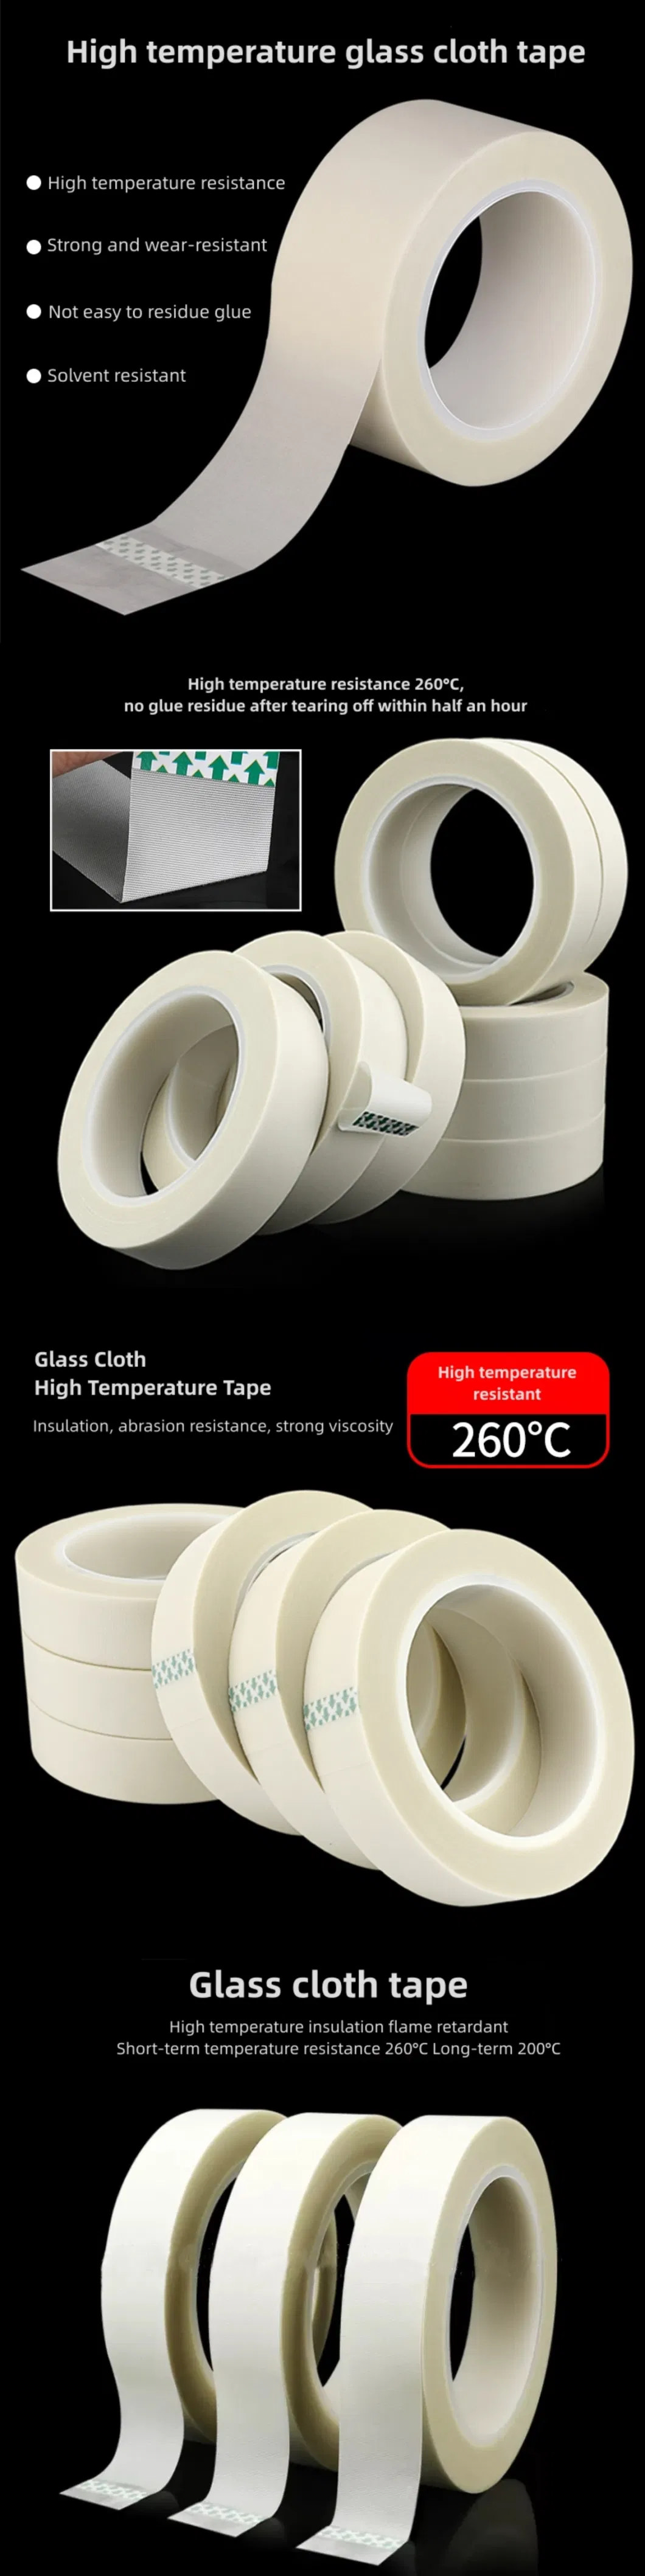 Reliable Holding Power Fiber Glass Filament Tape for Bundling and Reinforcing